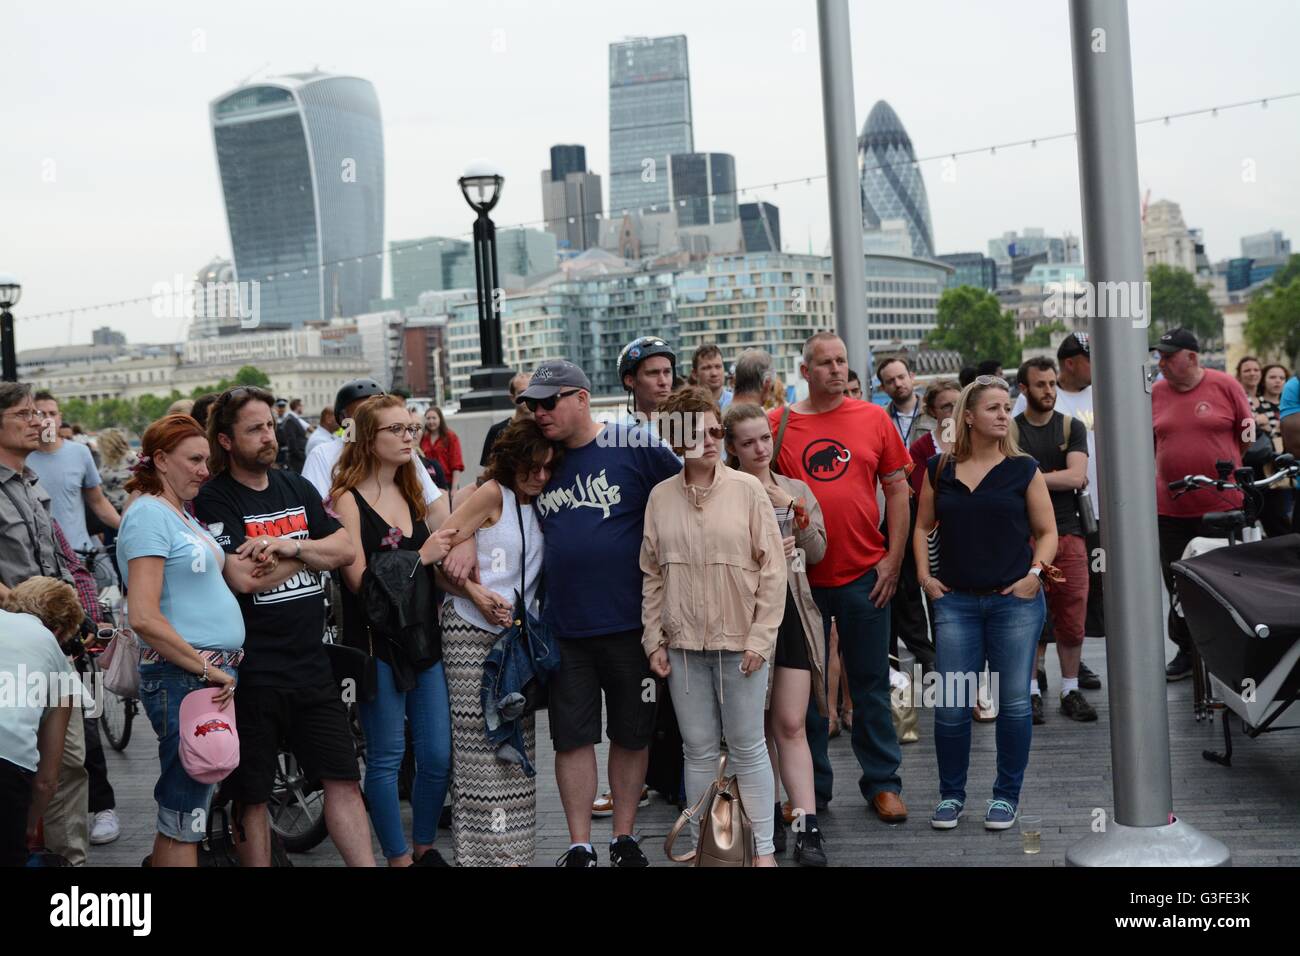 London, England. June 10th 2016. Loved ones and relatives join in a memorial event in London for cyclists and pedestrians who have been killed over recent weeks. Credit: Marc Ward/Alamy Live News Stock Photo